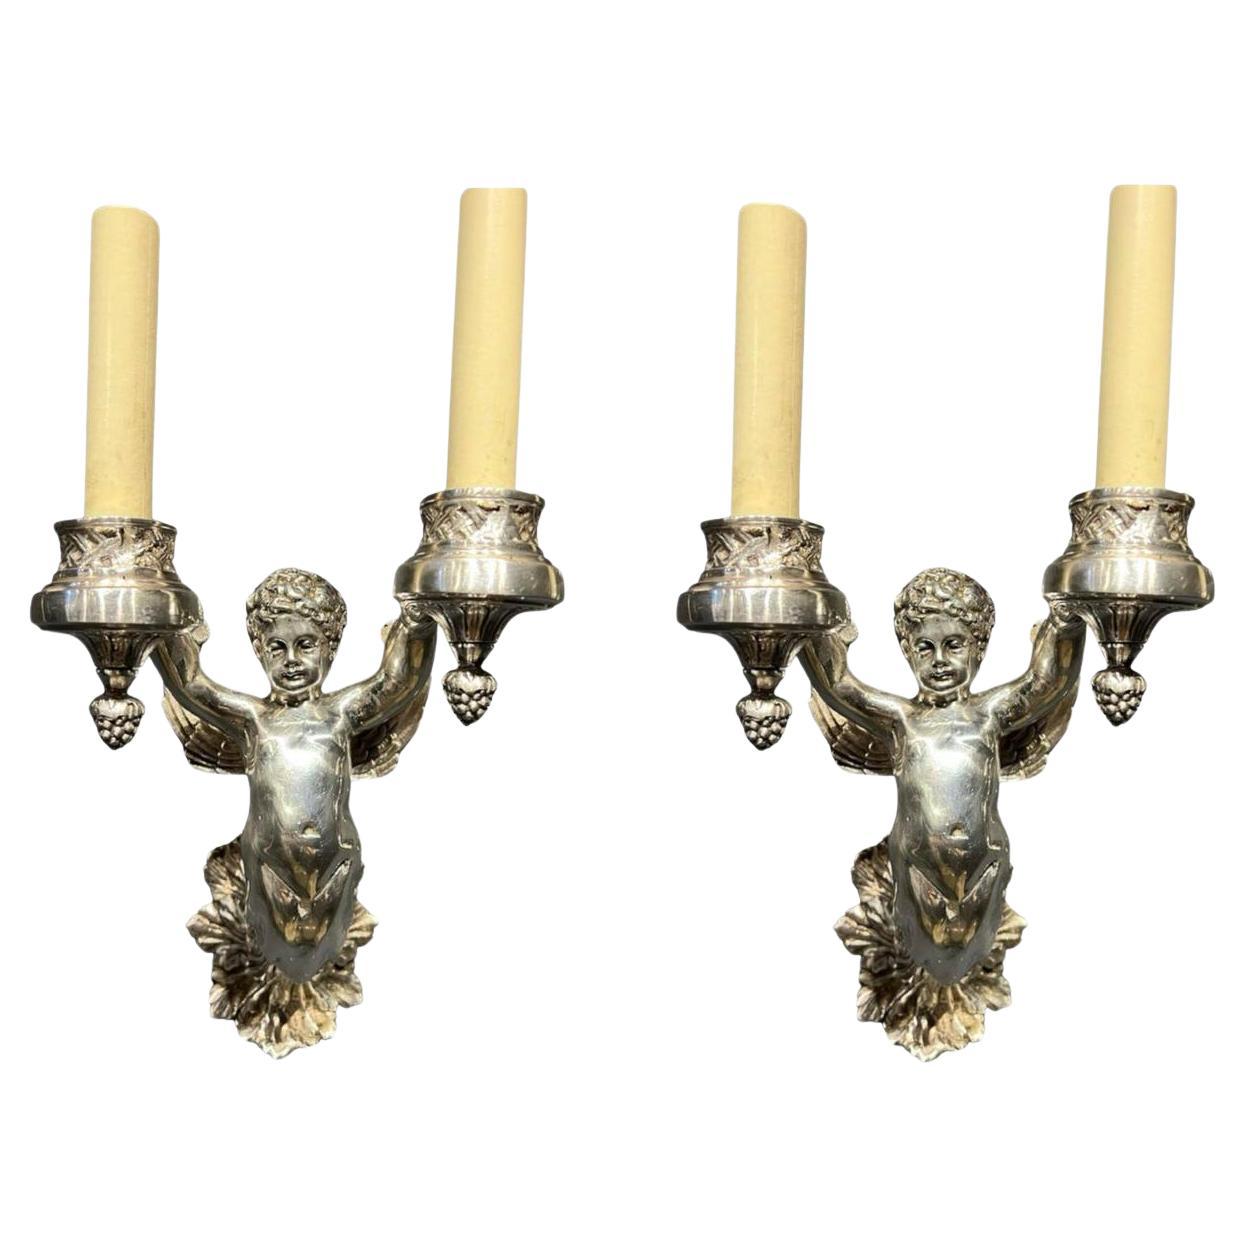 1920's English Silver Plated Cherub Sconces with 2 Lights For Sale